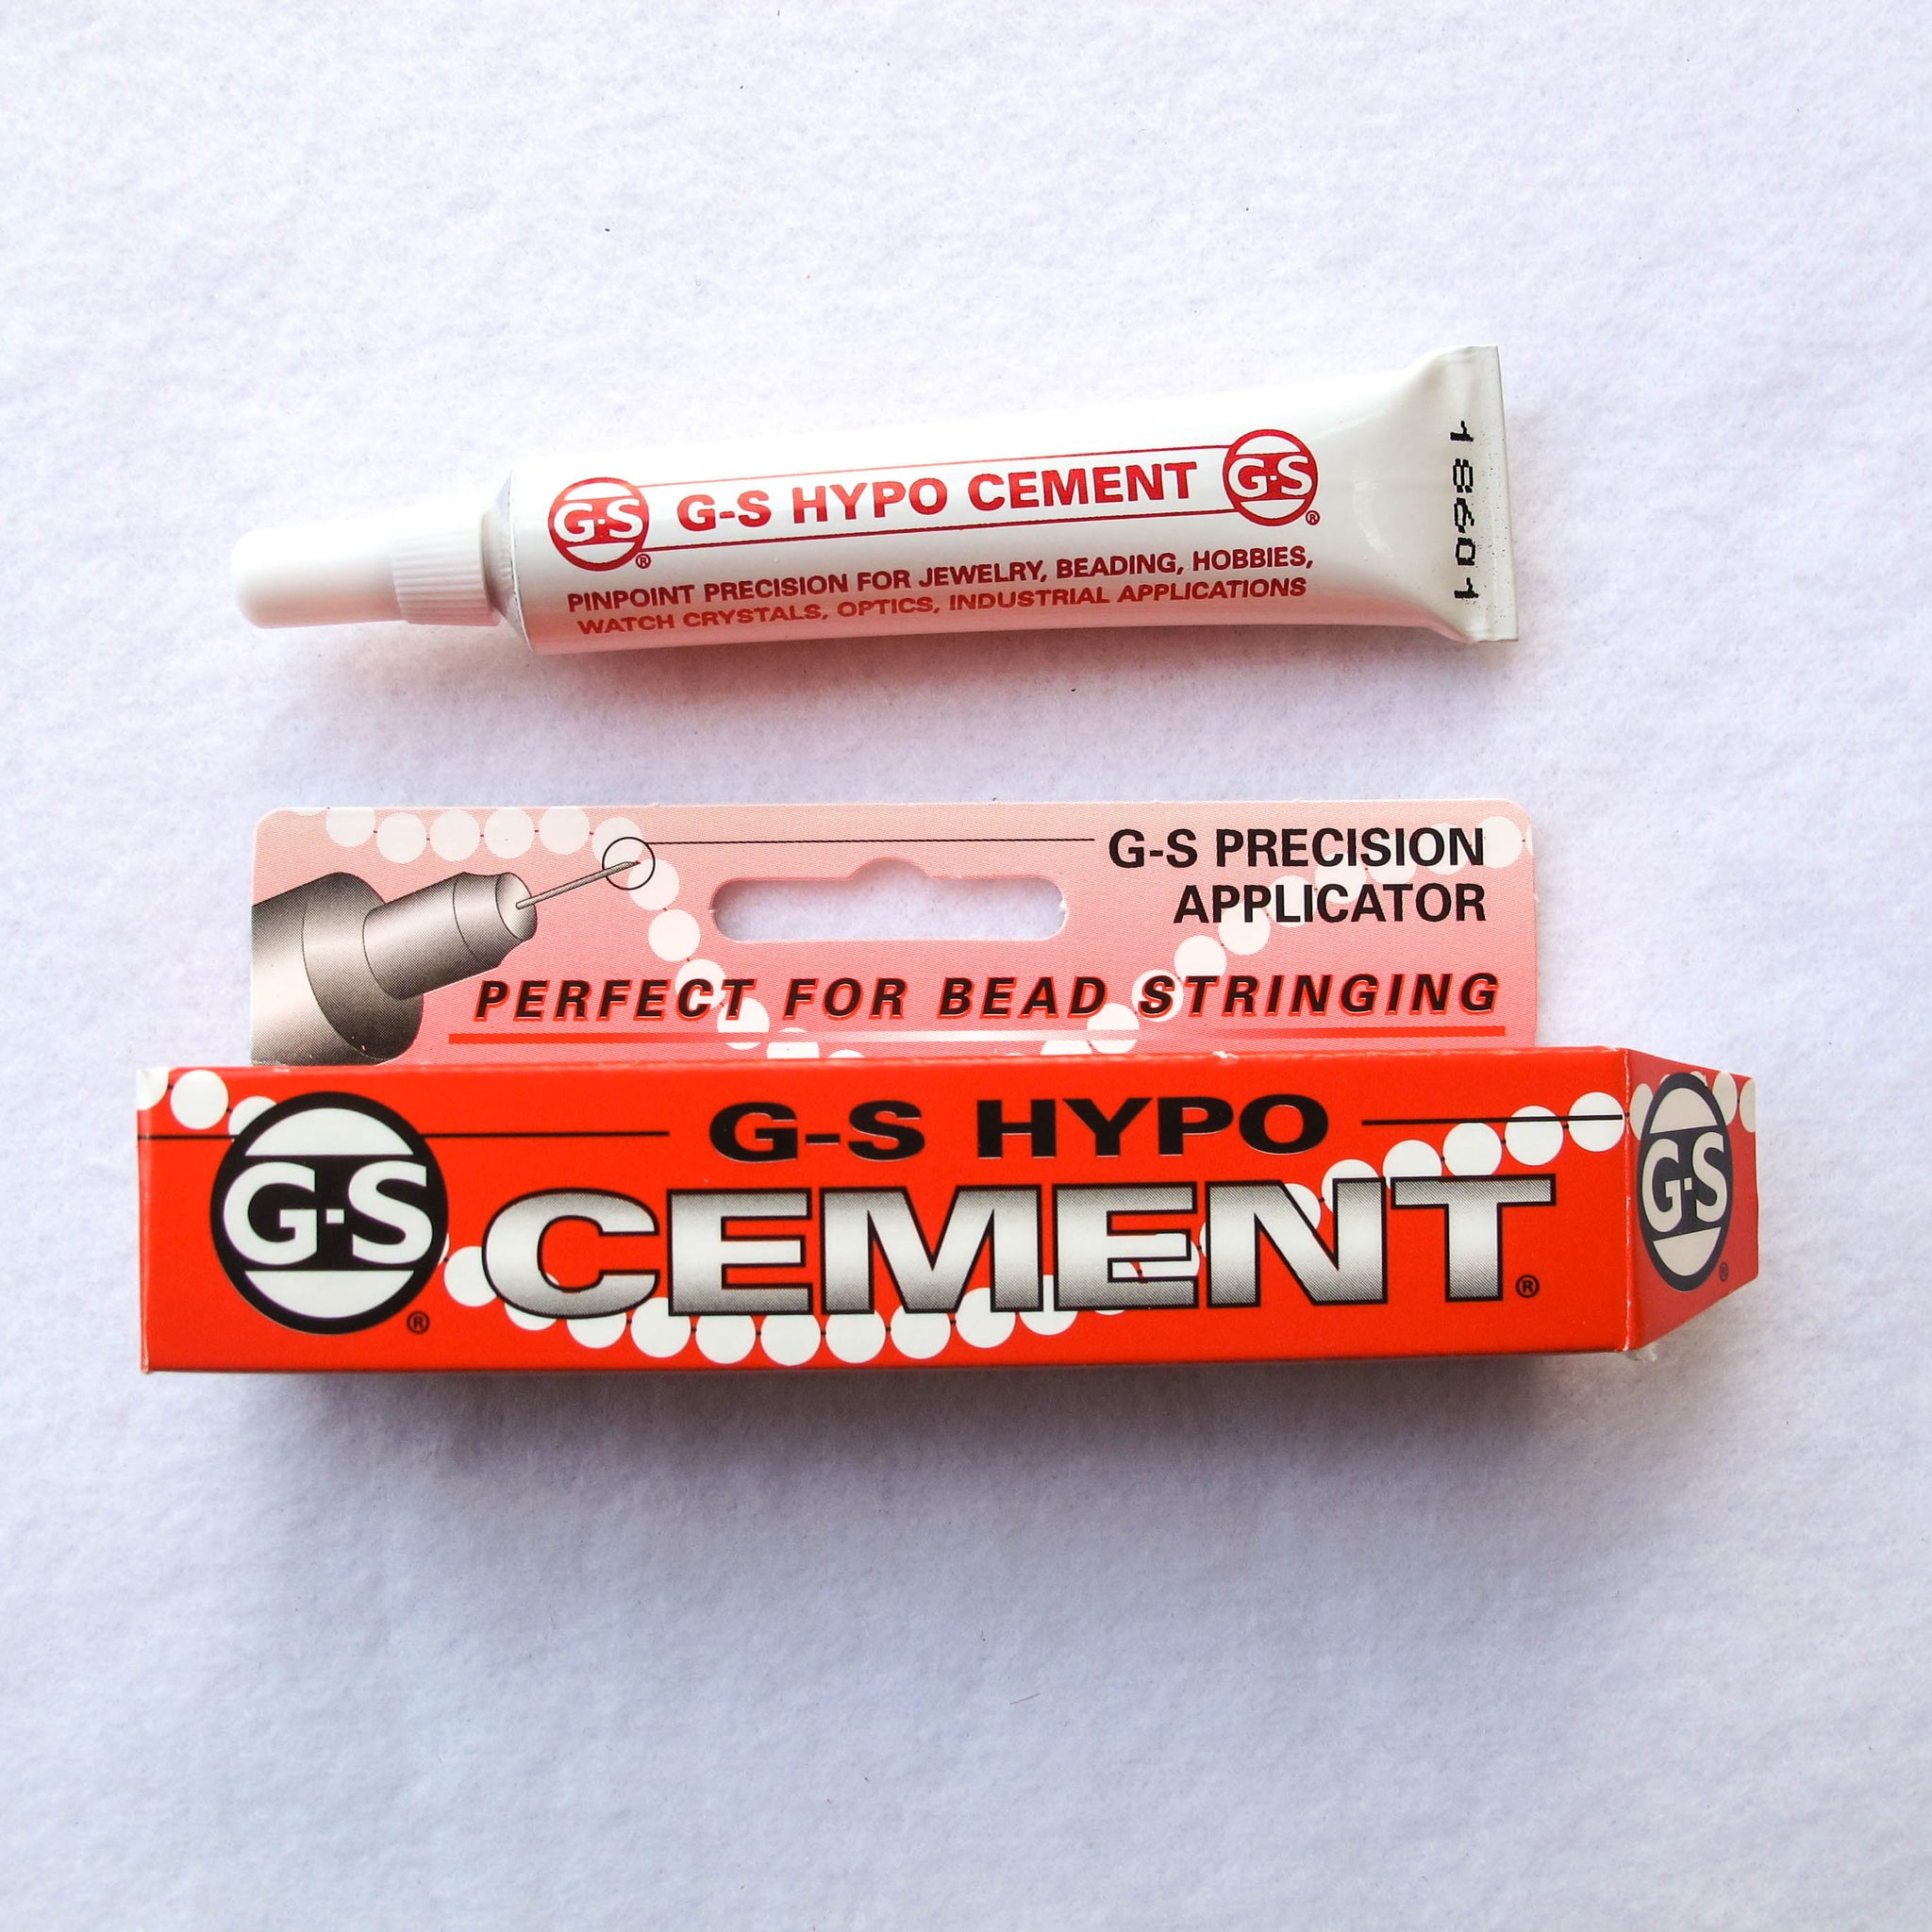 G-S HYPO CEMENT Jewelers Hobby Adhesive Crafting Glue 1/3 Oz. Tube 